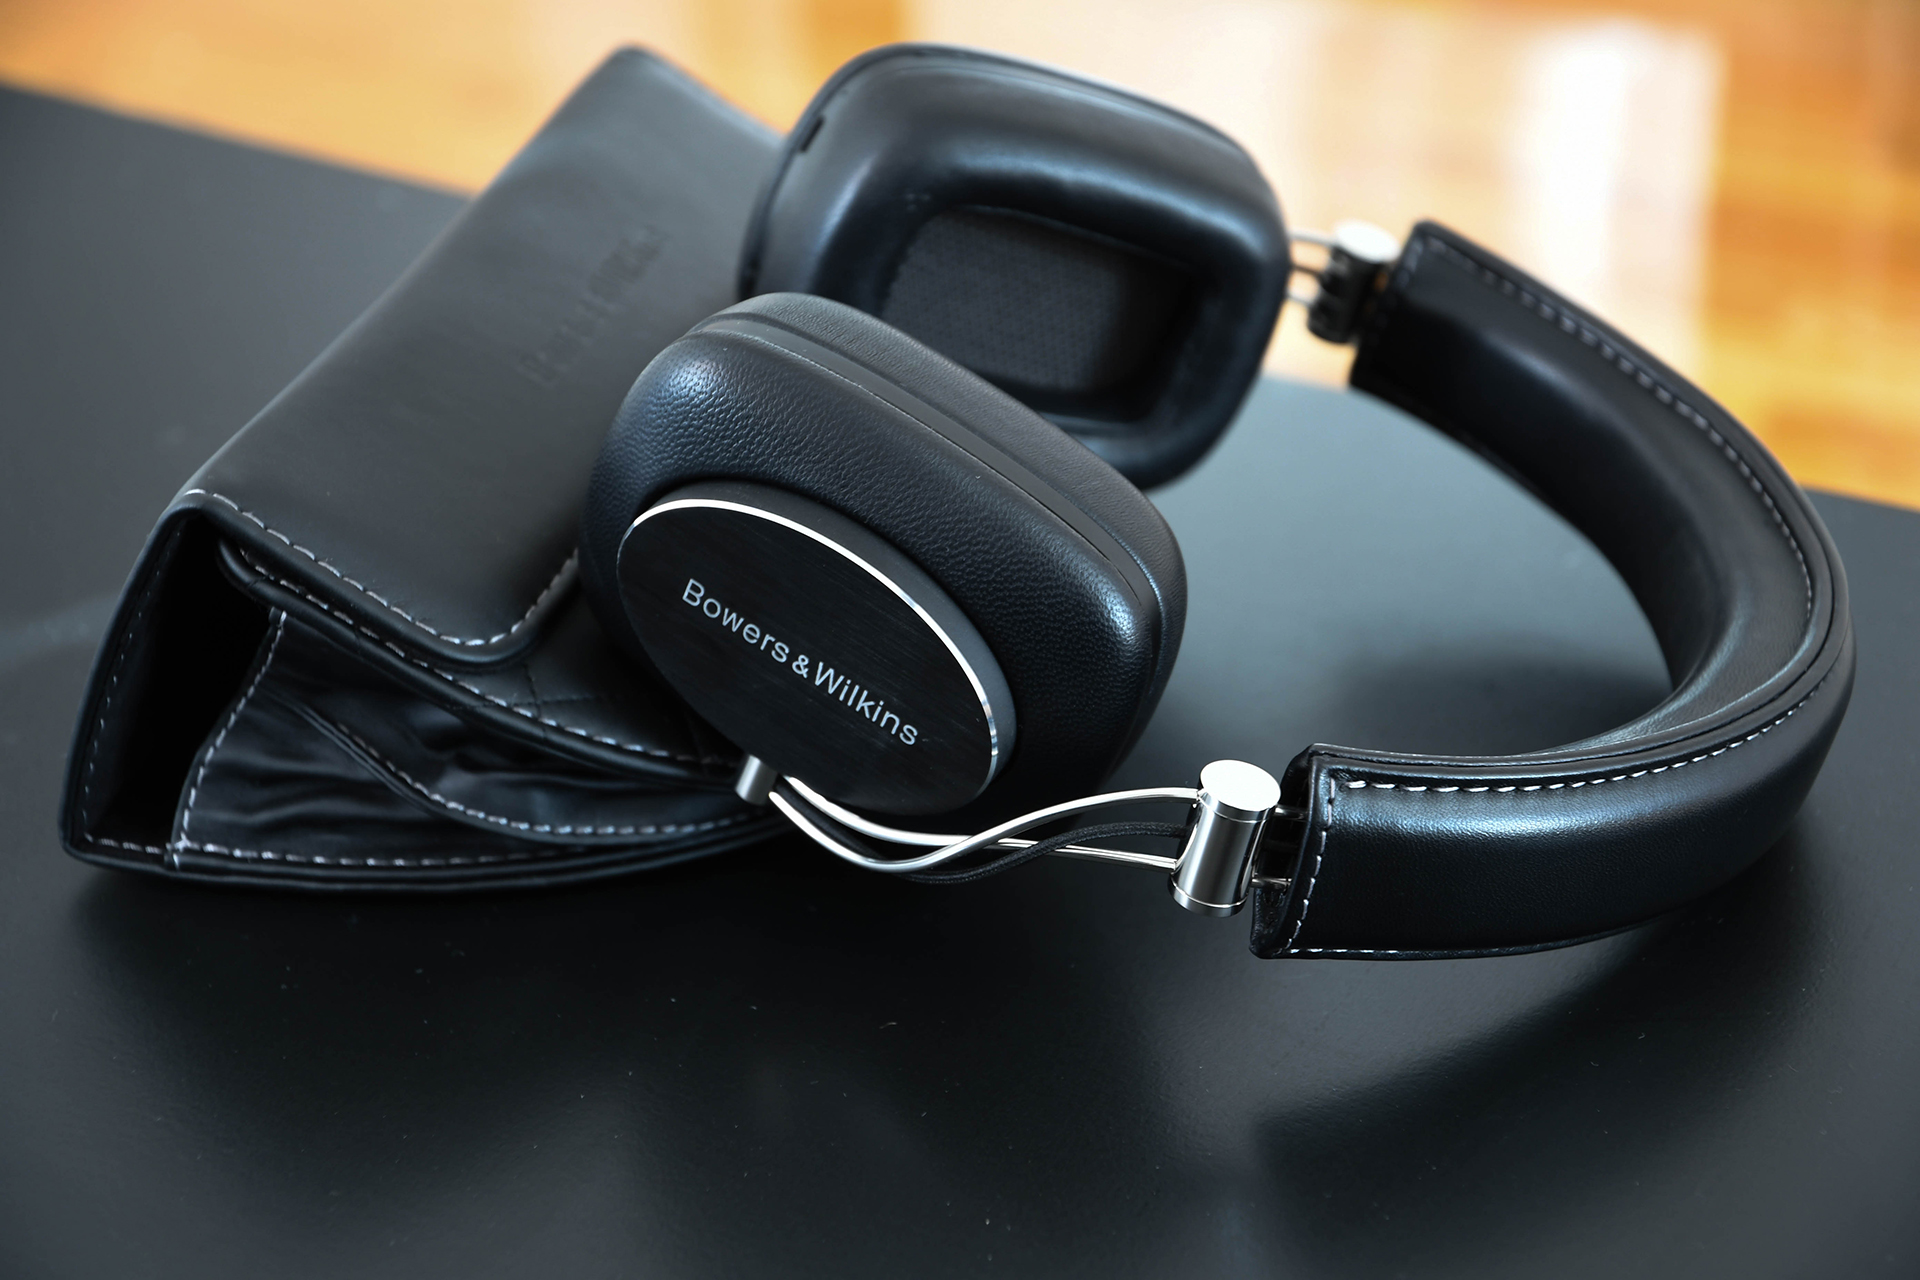 Bower & Wilkins' P7 wireless headphones are all luxe and great ...